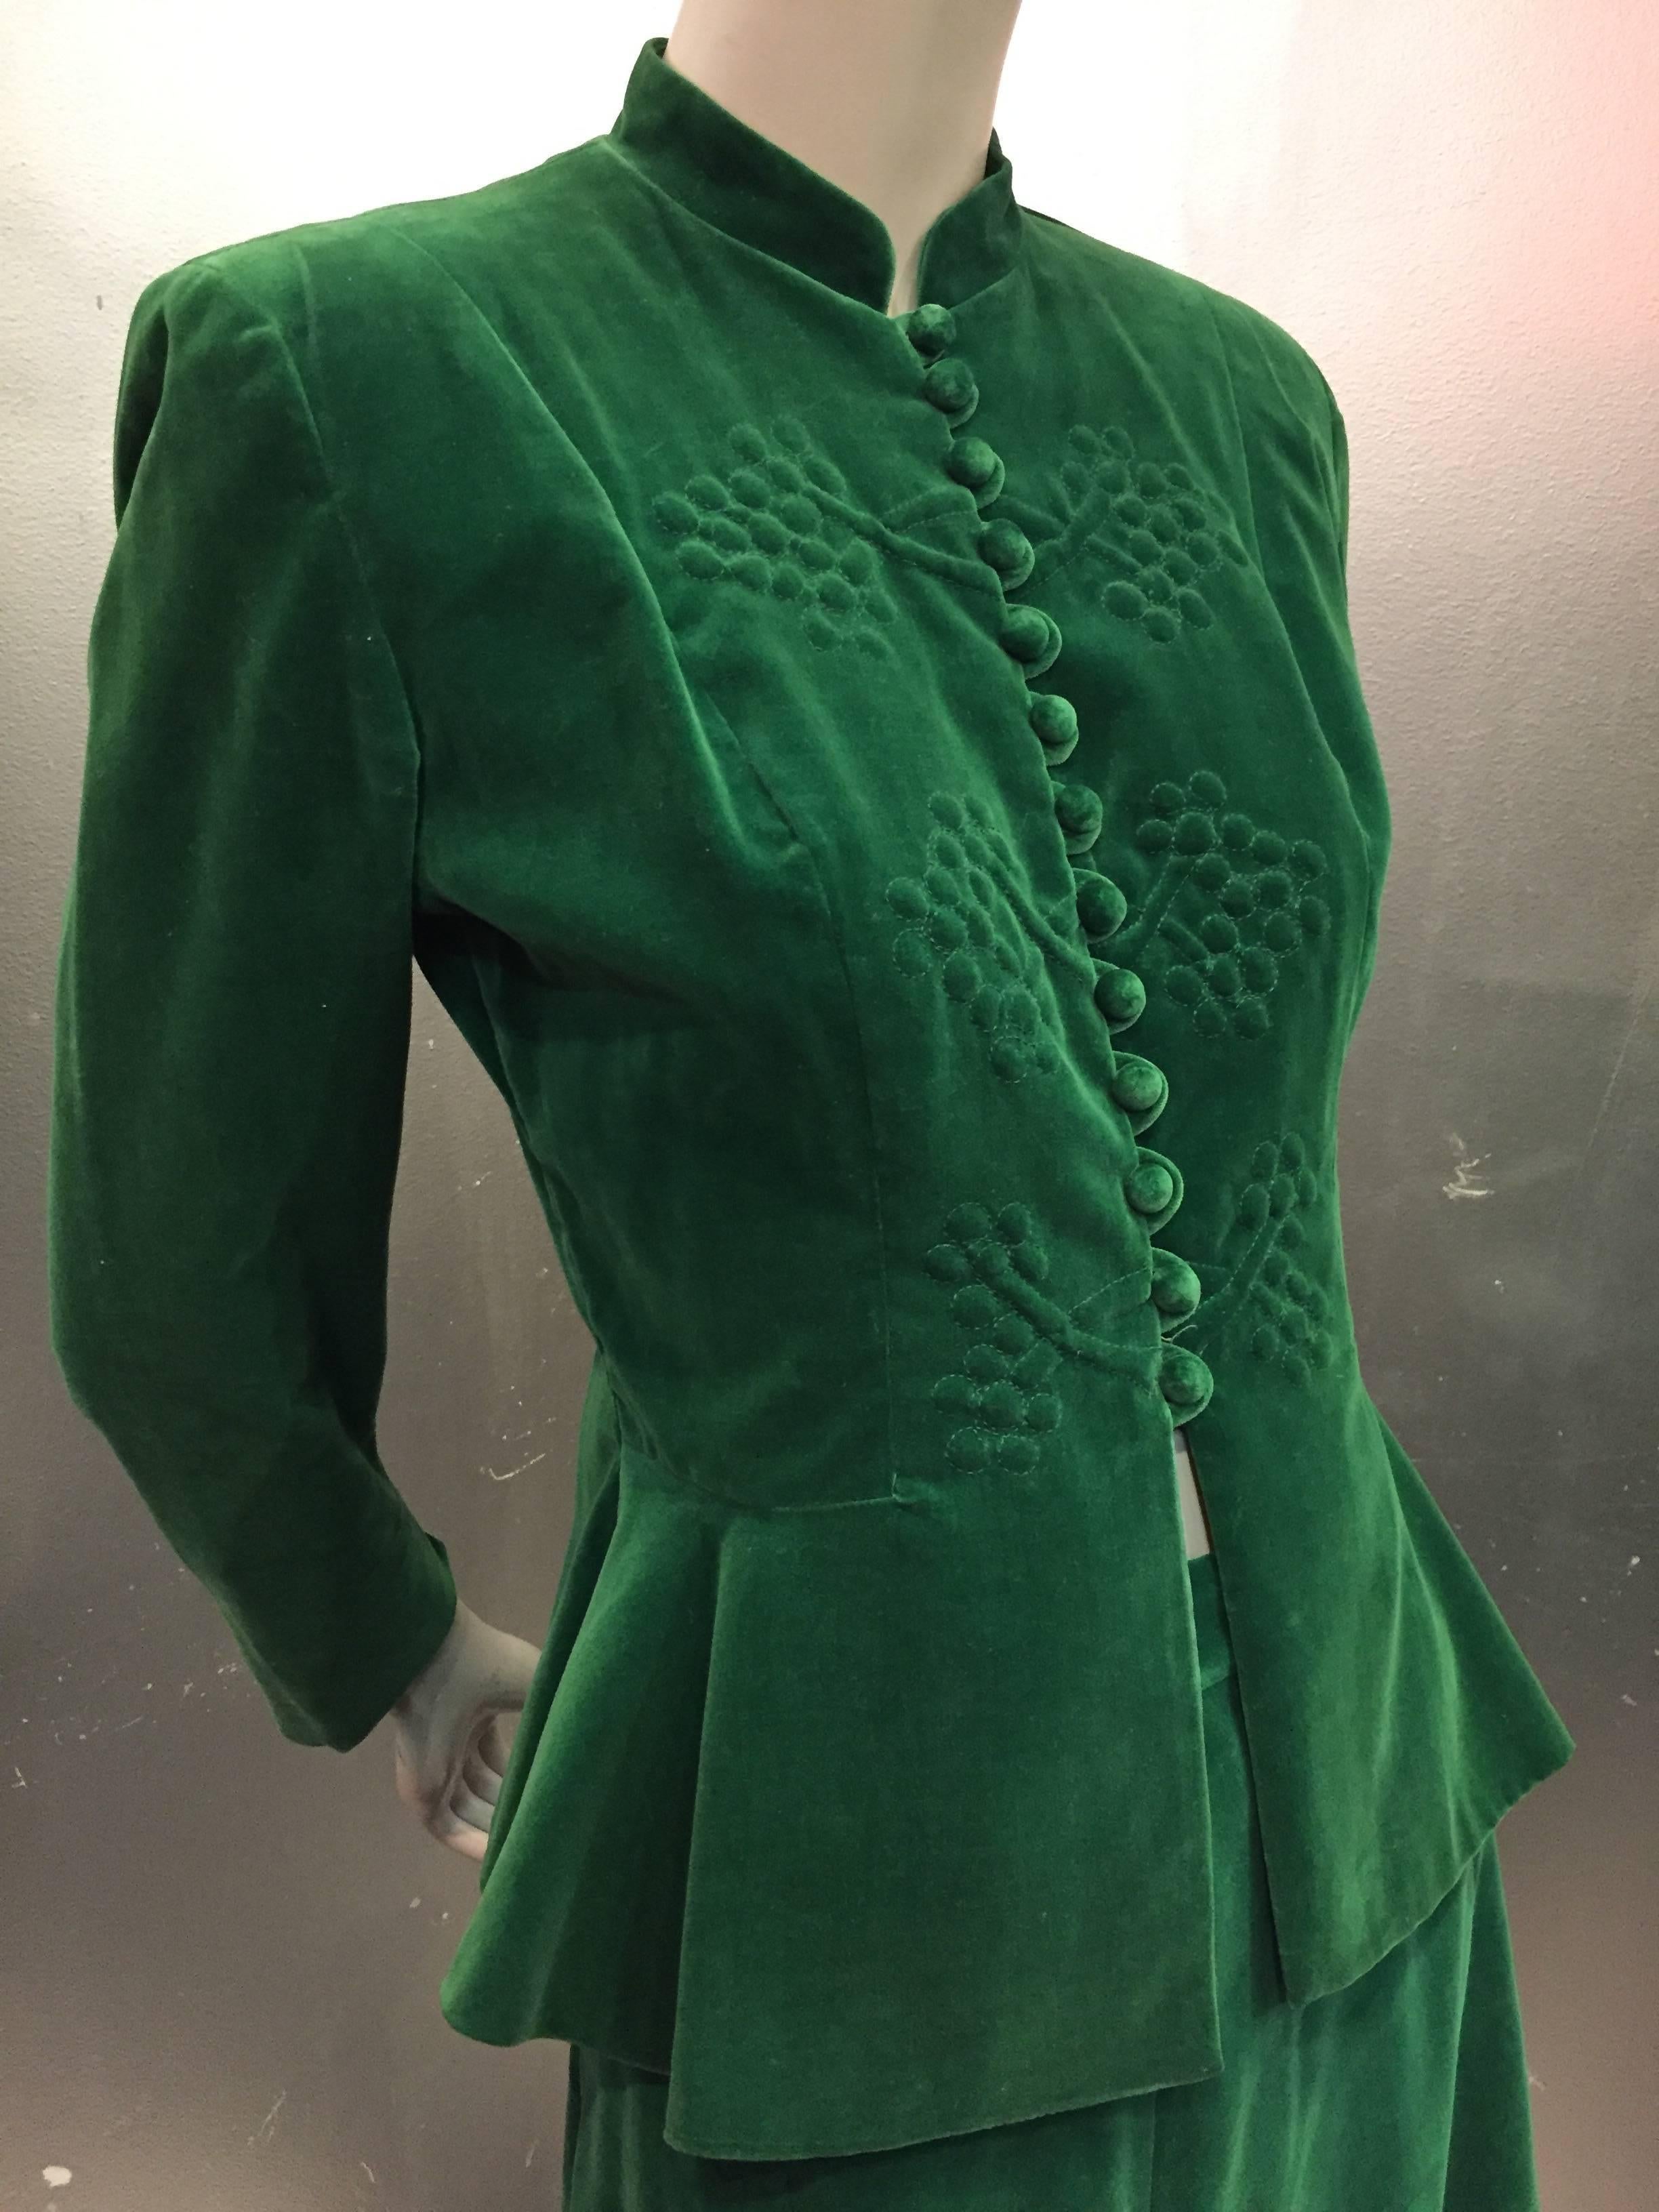 1940s Emerald Green Velvet Peplum Suit with Floral Trapunto Work and Flair 1